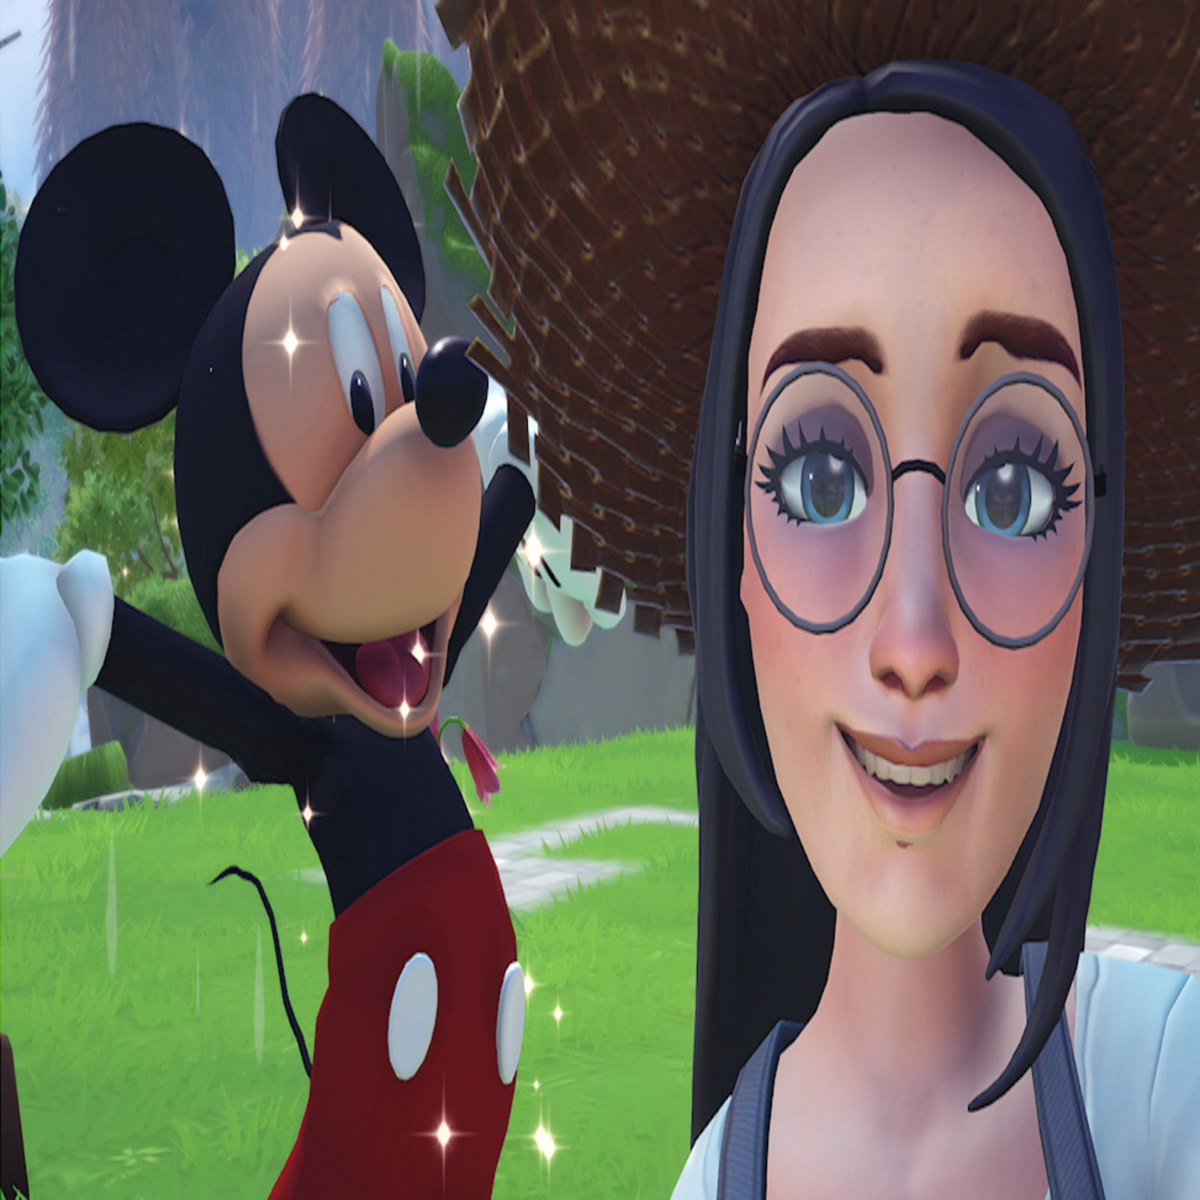 https://assetsio.gnwcdn.com/Disney-Dreamlight-Valley-characters-list%2C-including-all-current-and-future-characters.jpg?width=1200&height=1200&fit=crop&quality=100&format=png&enable=upscale&auto=webp